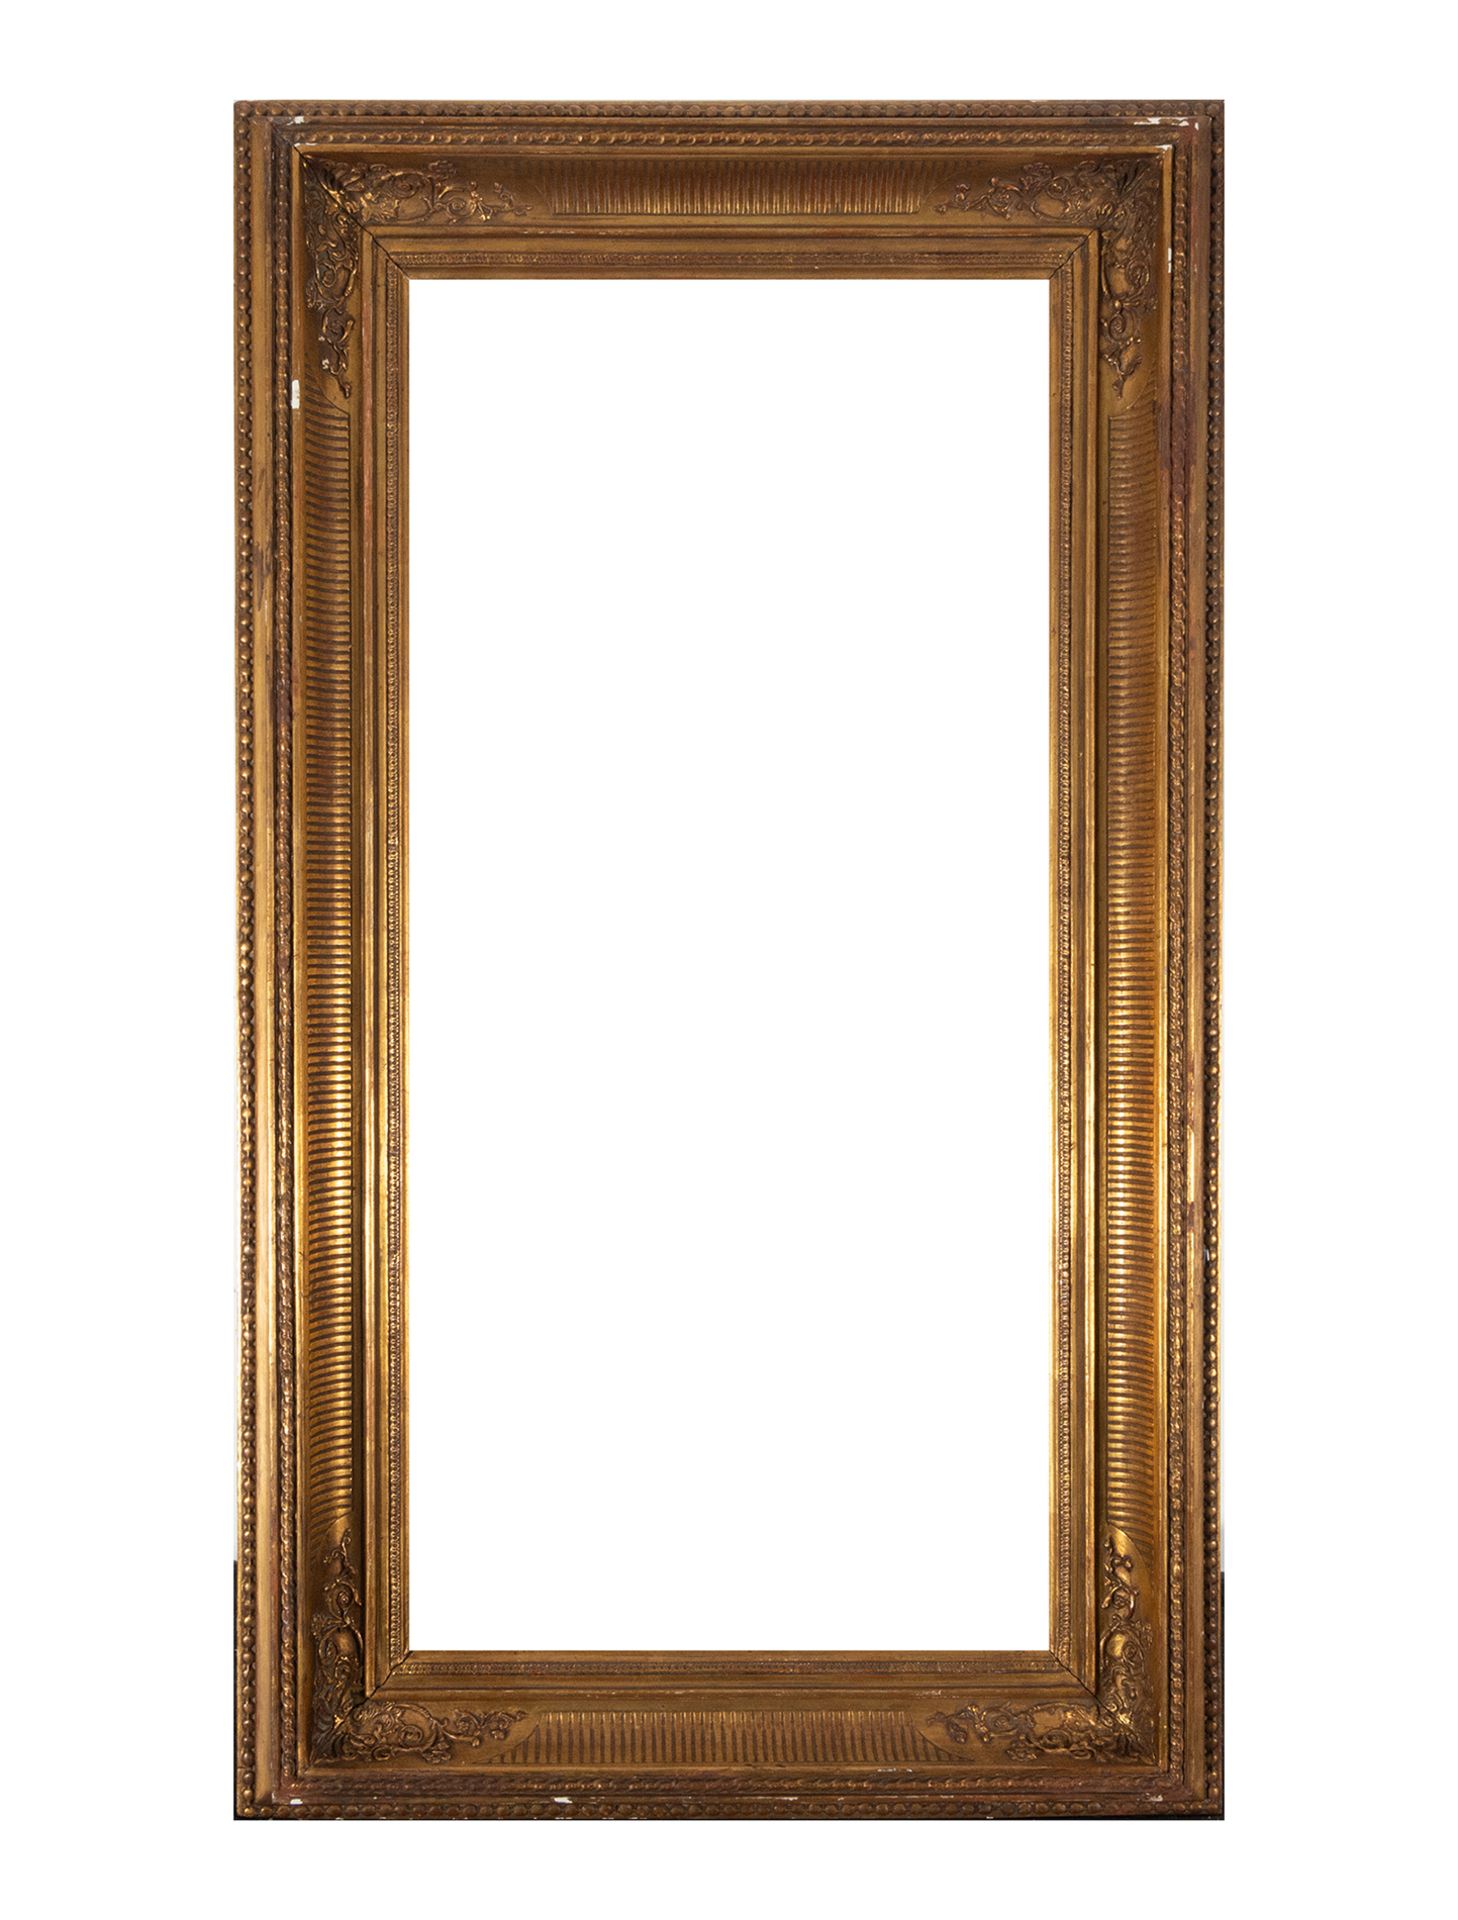 French Empire style frame, in gilt and wood molding, early 20th century